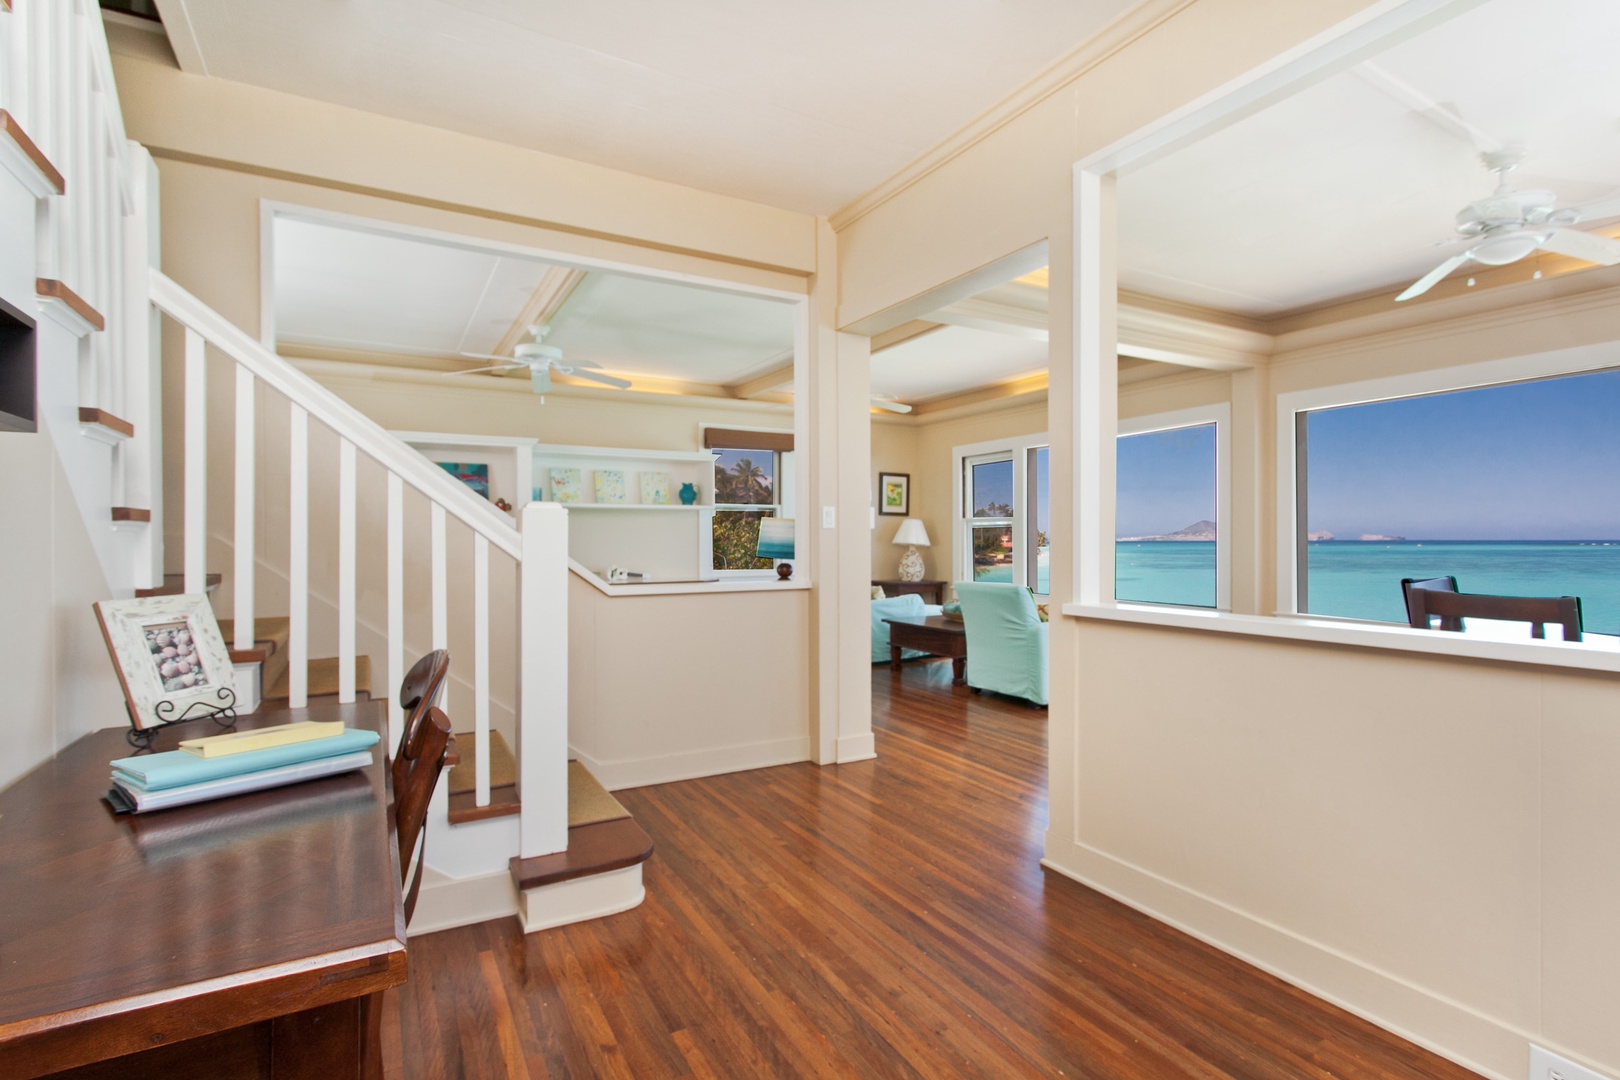 Kailua Vacation Rentals, Hale Mahina Lanikai* - Rich wooden Ohia floors and an open layout that connects living spaces.